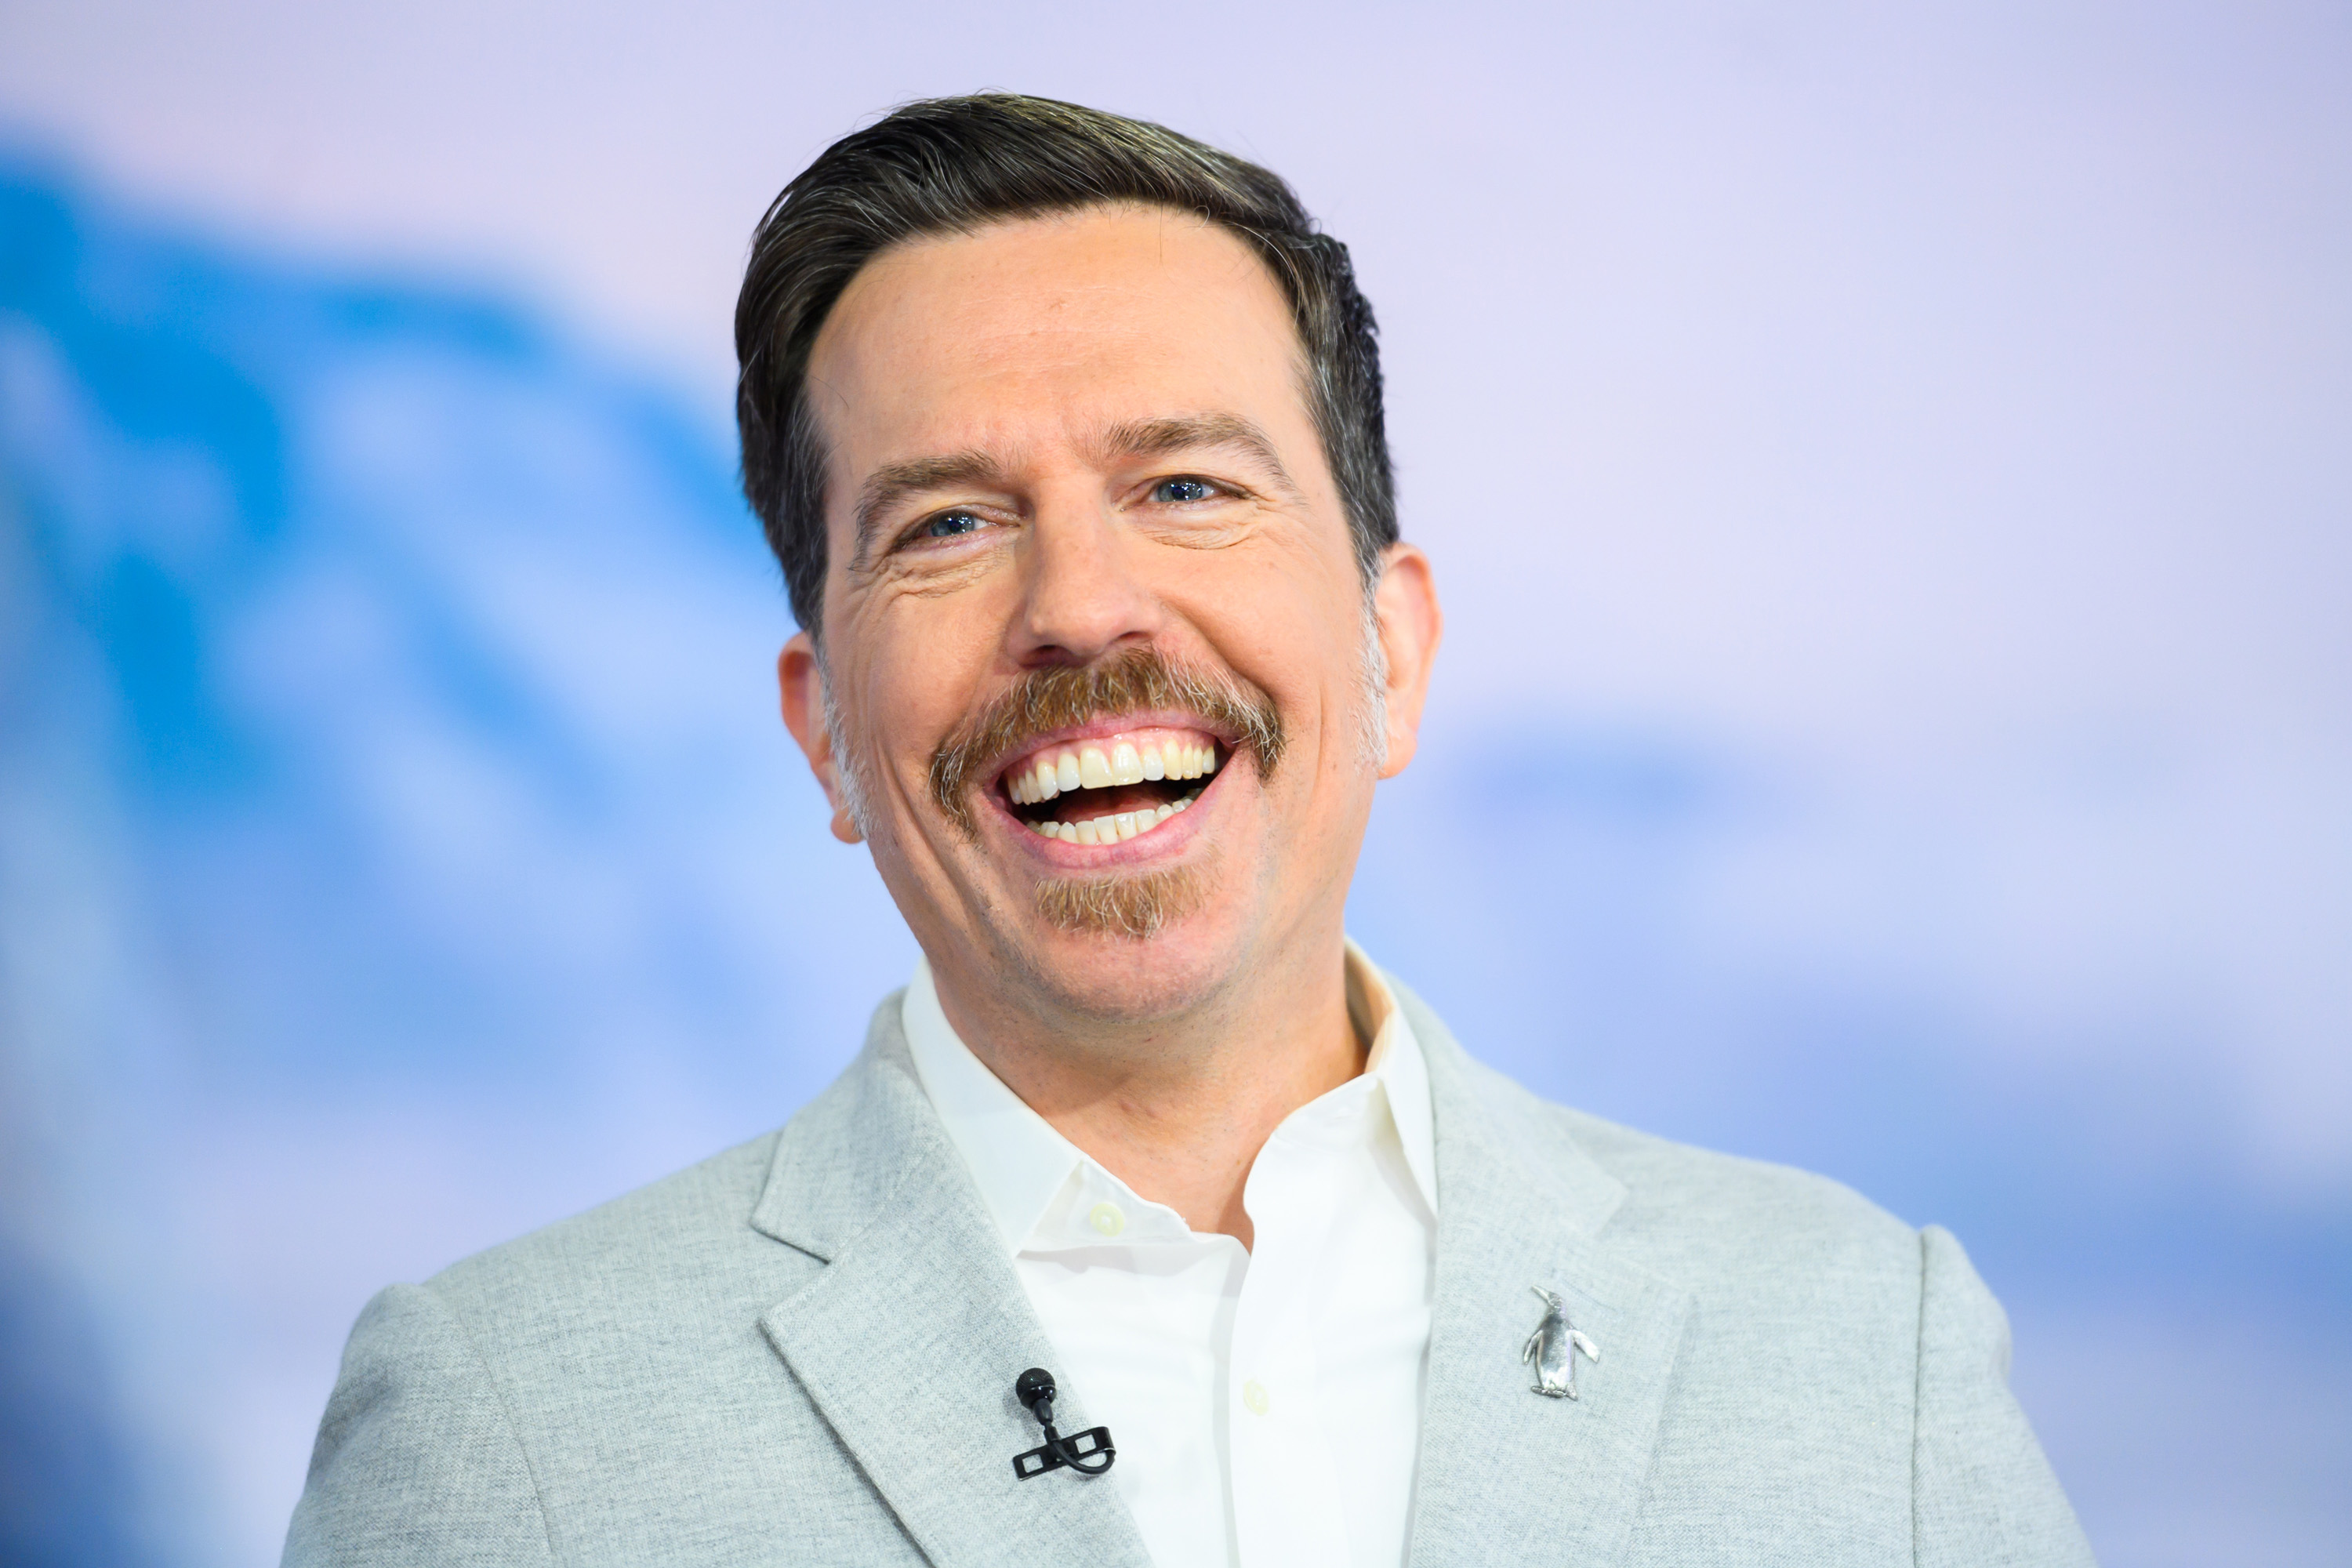 Ed Helms on the "TODAY" show on April 15, 2019. | Source: Getty Images